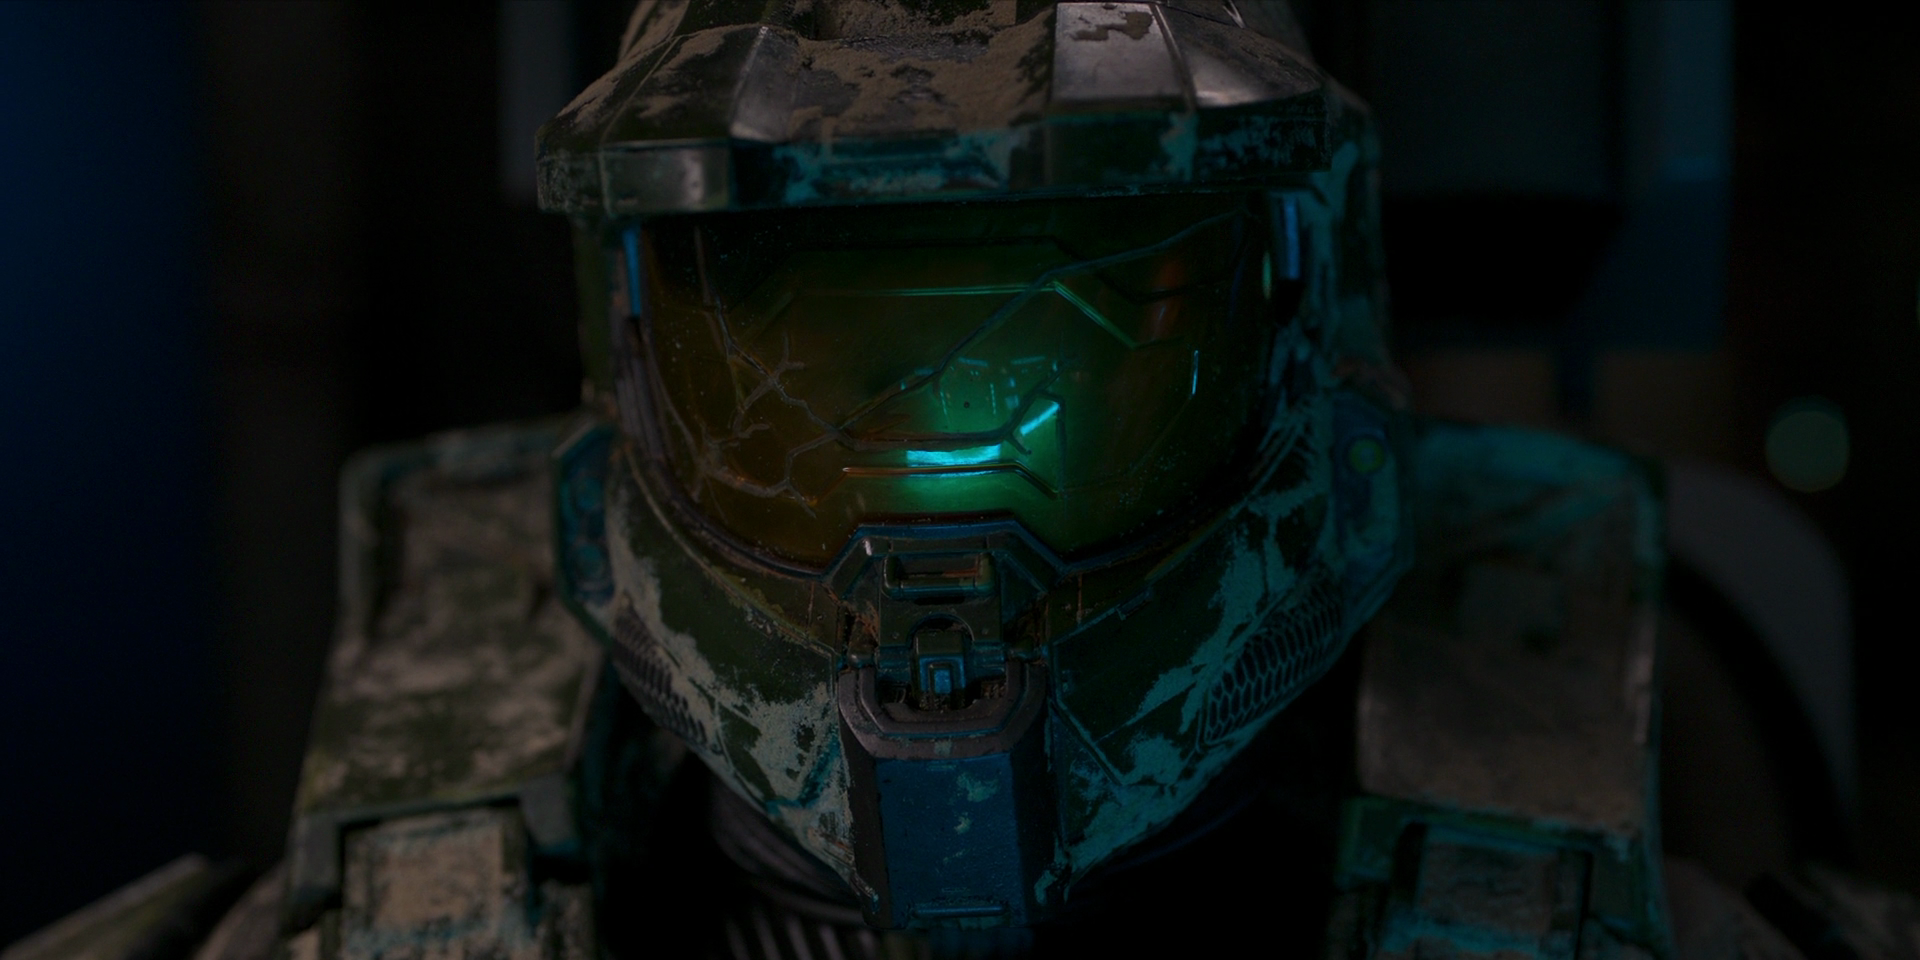 THE MILQUETOAST WAR: What went wrong with the Halo TV series